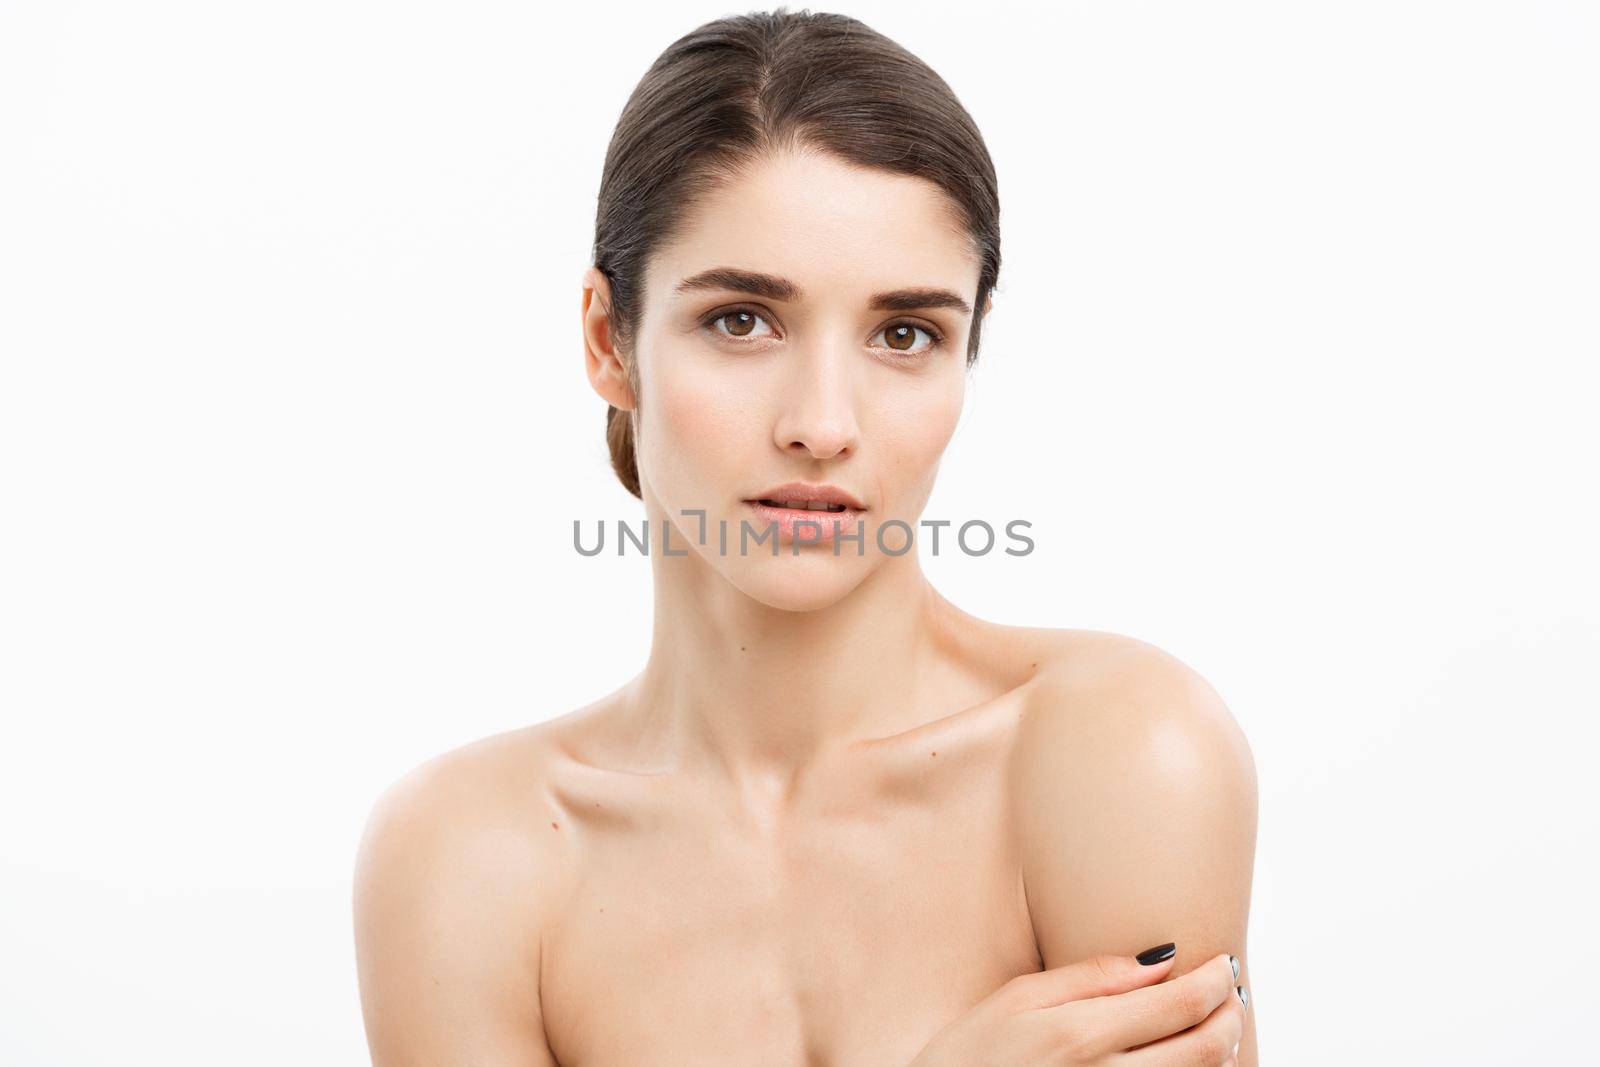 Beauty and spa concept - Charming young woman with perfect clear skin over white background